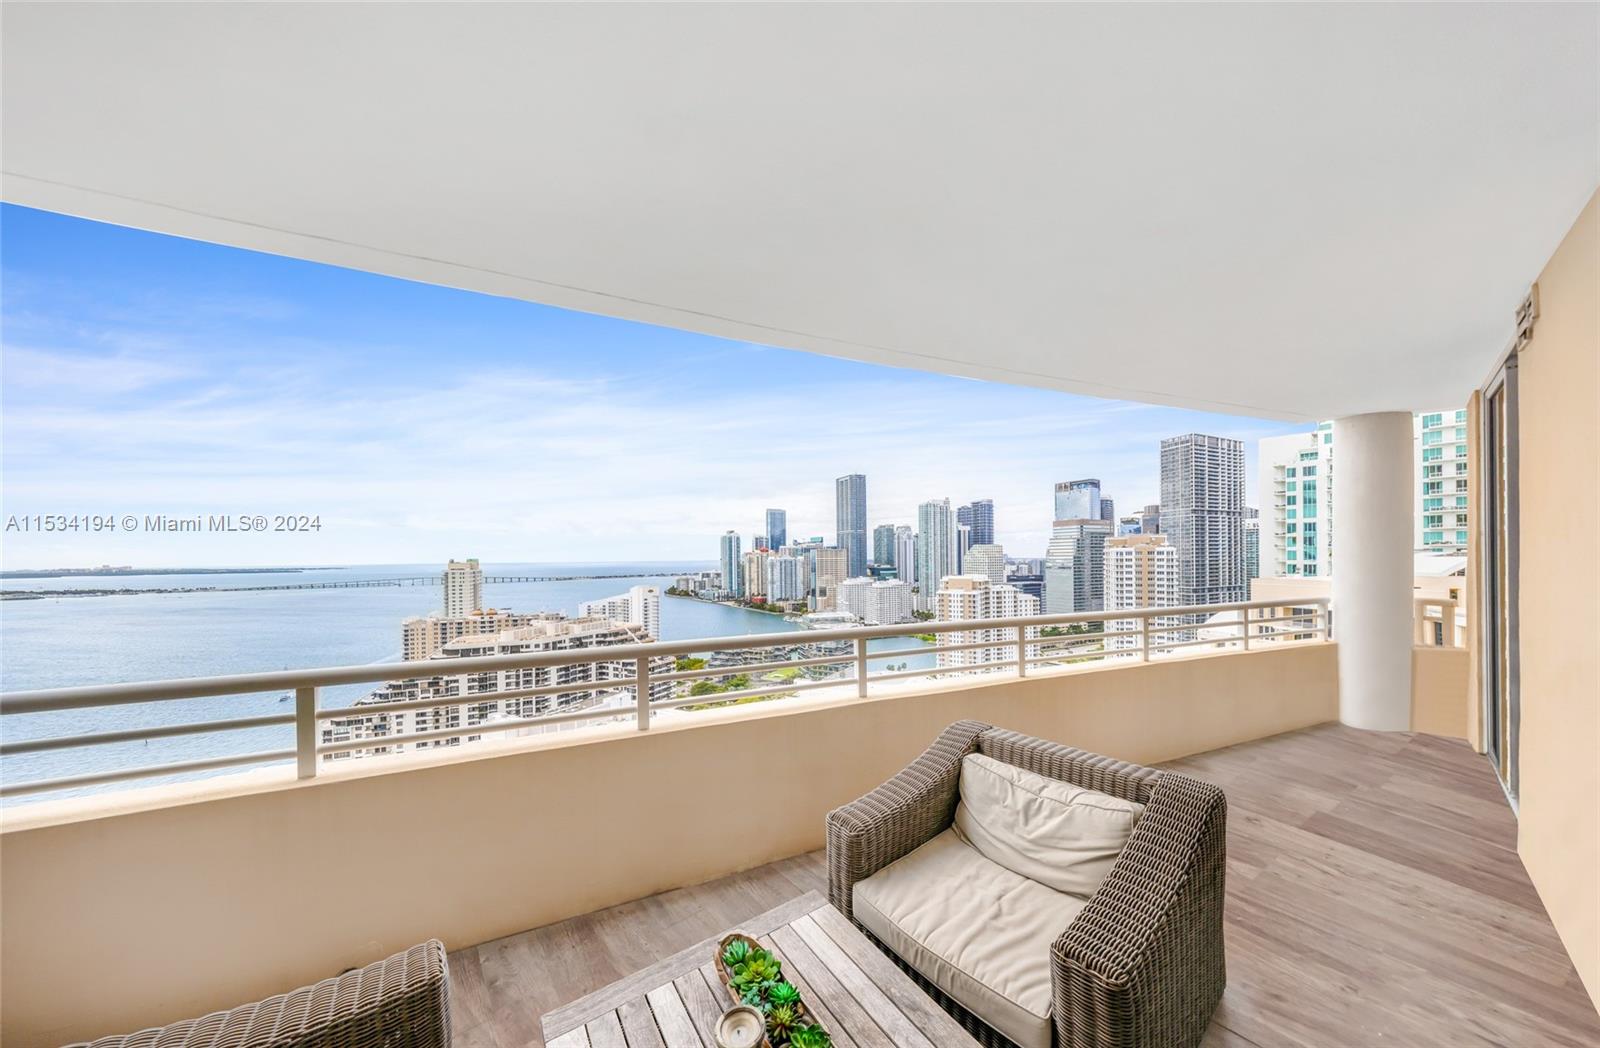 This distingushed condominium overlooking the city of Miami is one of a kind. Located in Brickell key, the most prestigious island in Miami. Professionally decorated and designed in 2015, this modern exquisite unit has, 2 bedrooms and  2 1/2 bath with an open kitchen. This unit line has the largest master bedroom in the building. All Thermador appliances with a stand alone tall wine cooler, washer and dryer, and a large balcony. One of the best views in the city overlooking East, South, and West. Amenities include 2 story gym and a large pool look over the ocean, interior Racquetball courts and more. The unit is kept in perfect condition and ready for move in. Perfect for singles, couples, or a small family.